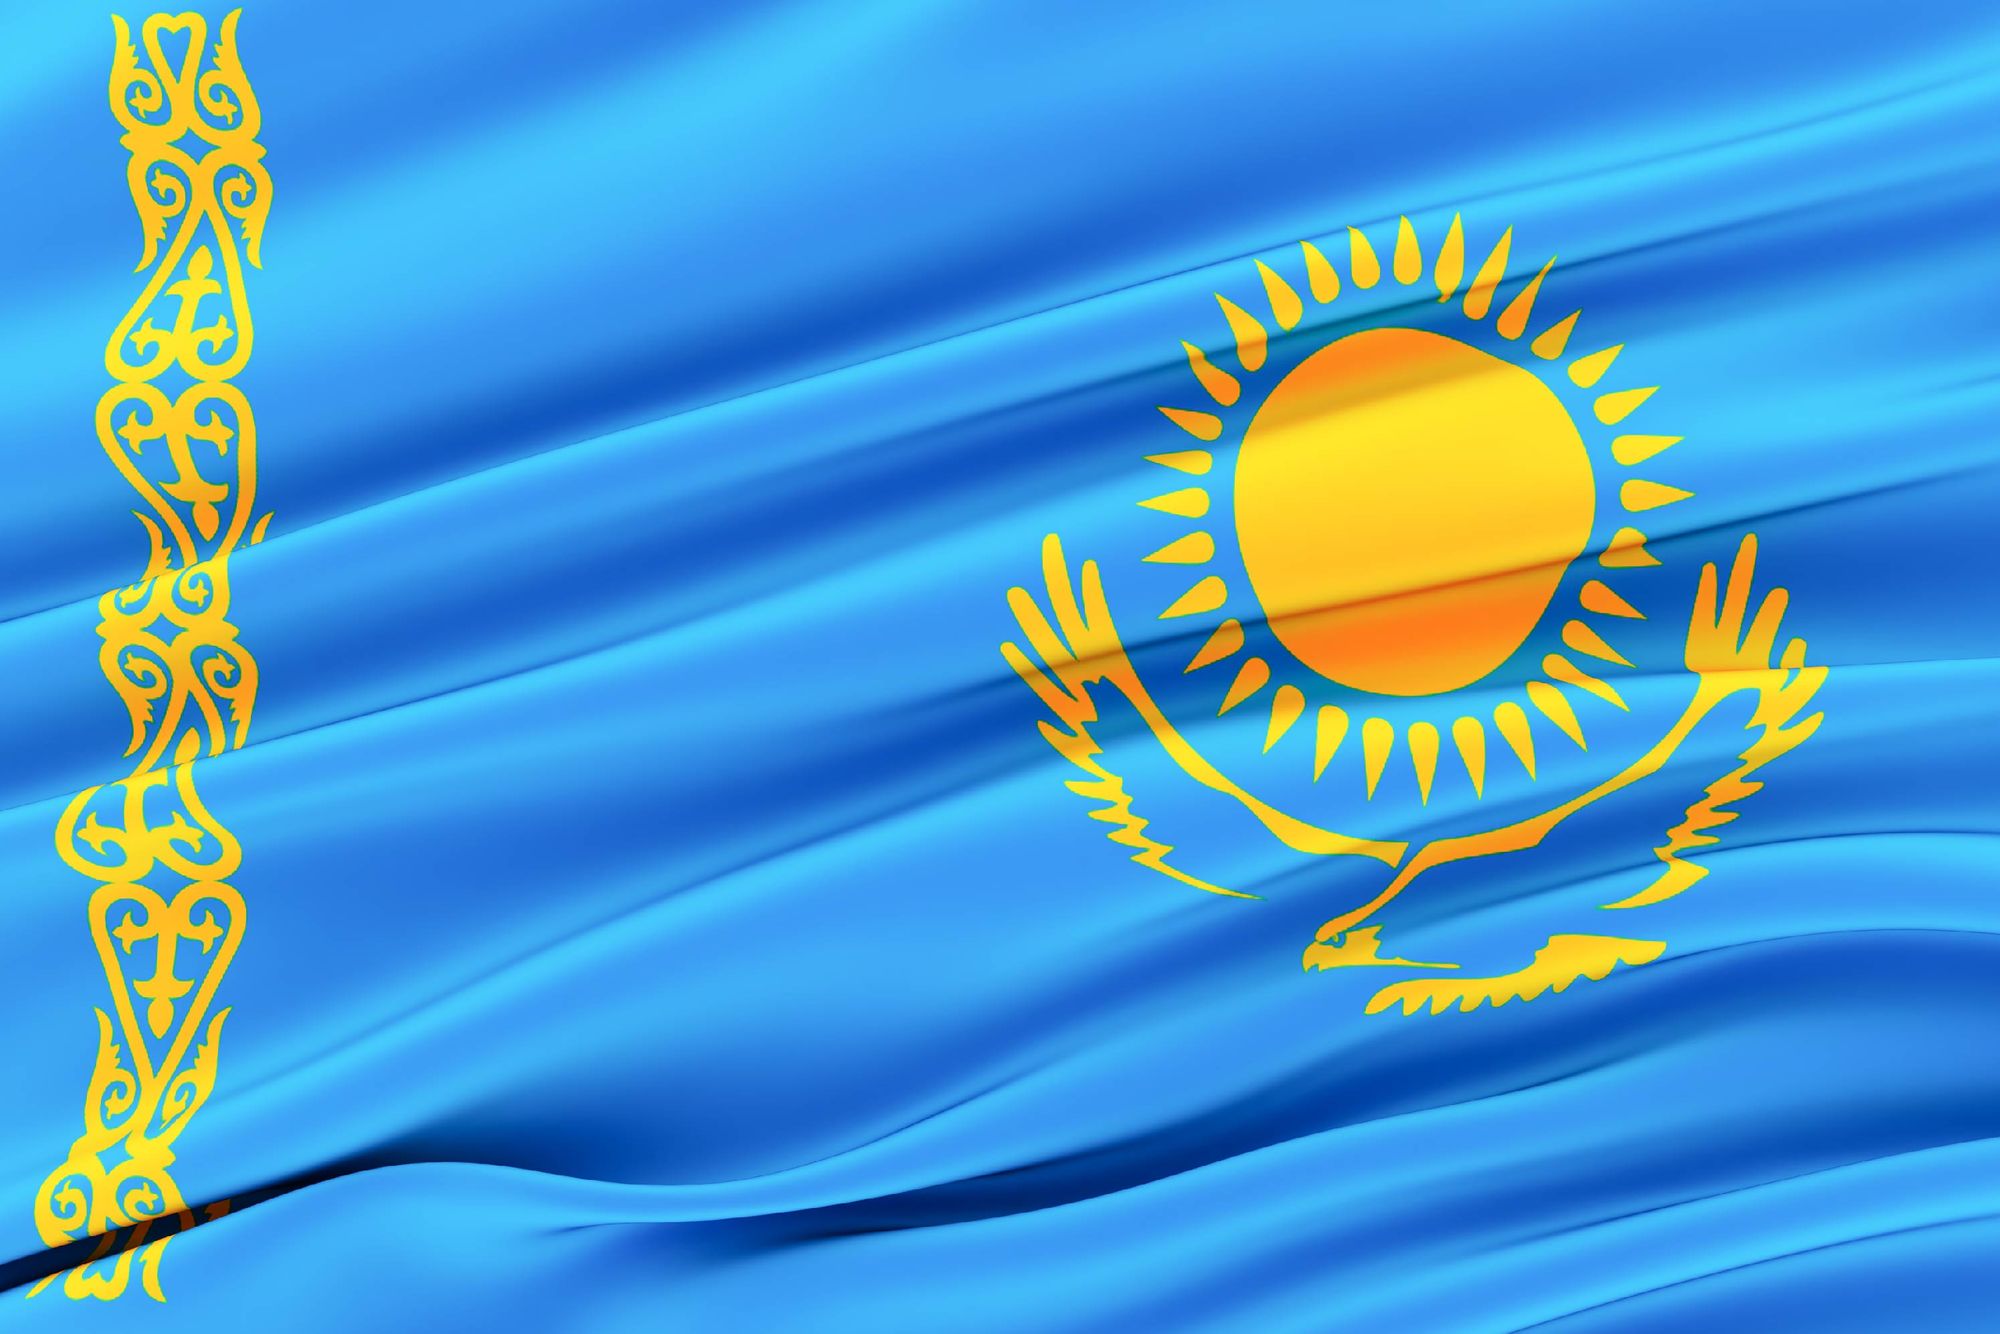 Financial hub in Kazakhstan attracts Chinese miners for cheap electricity and legal protection